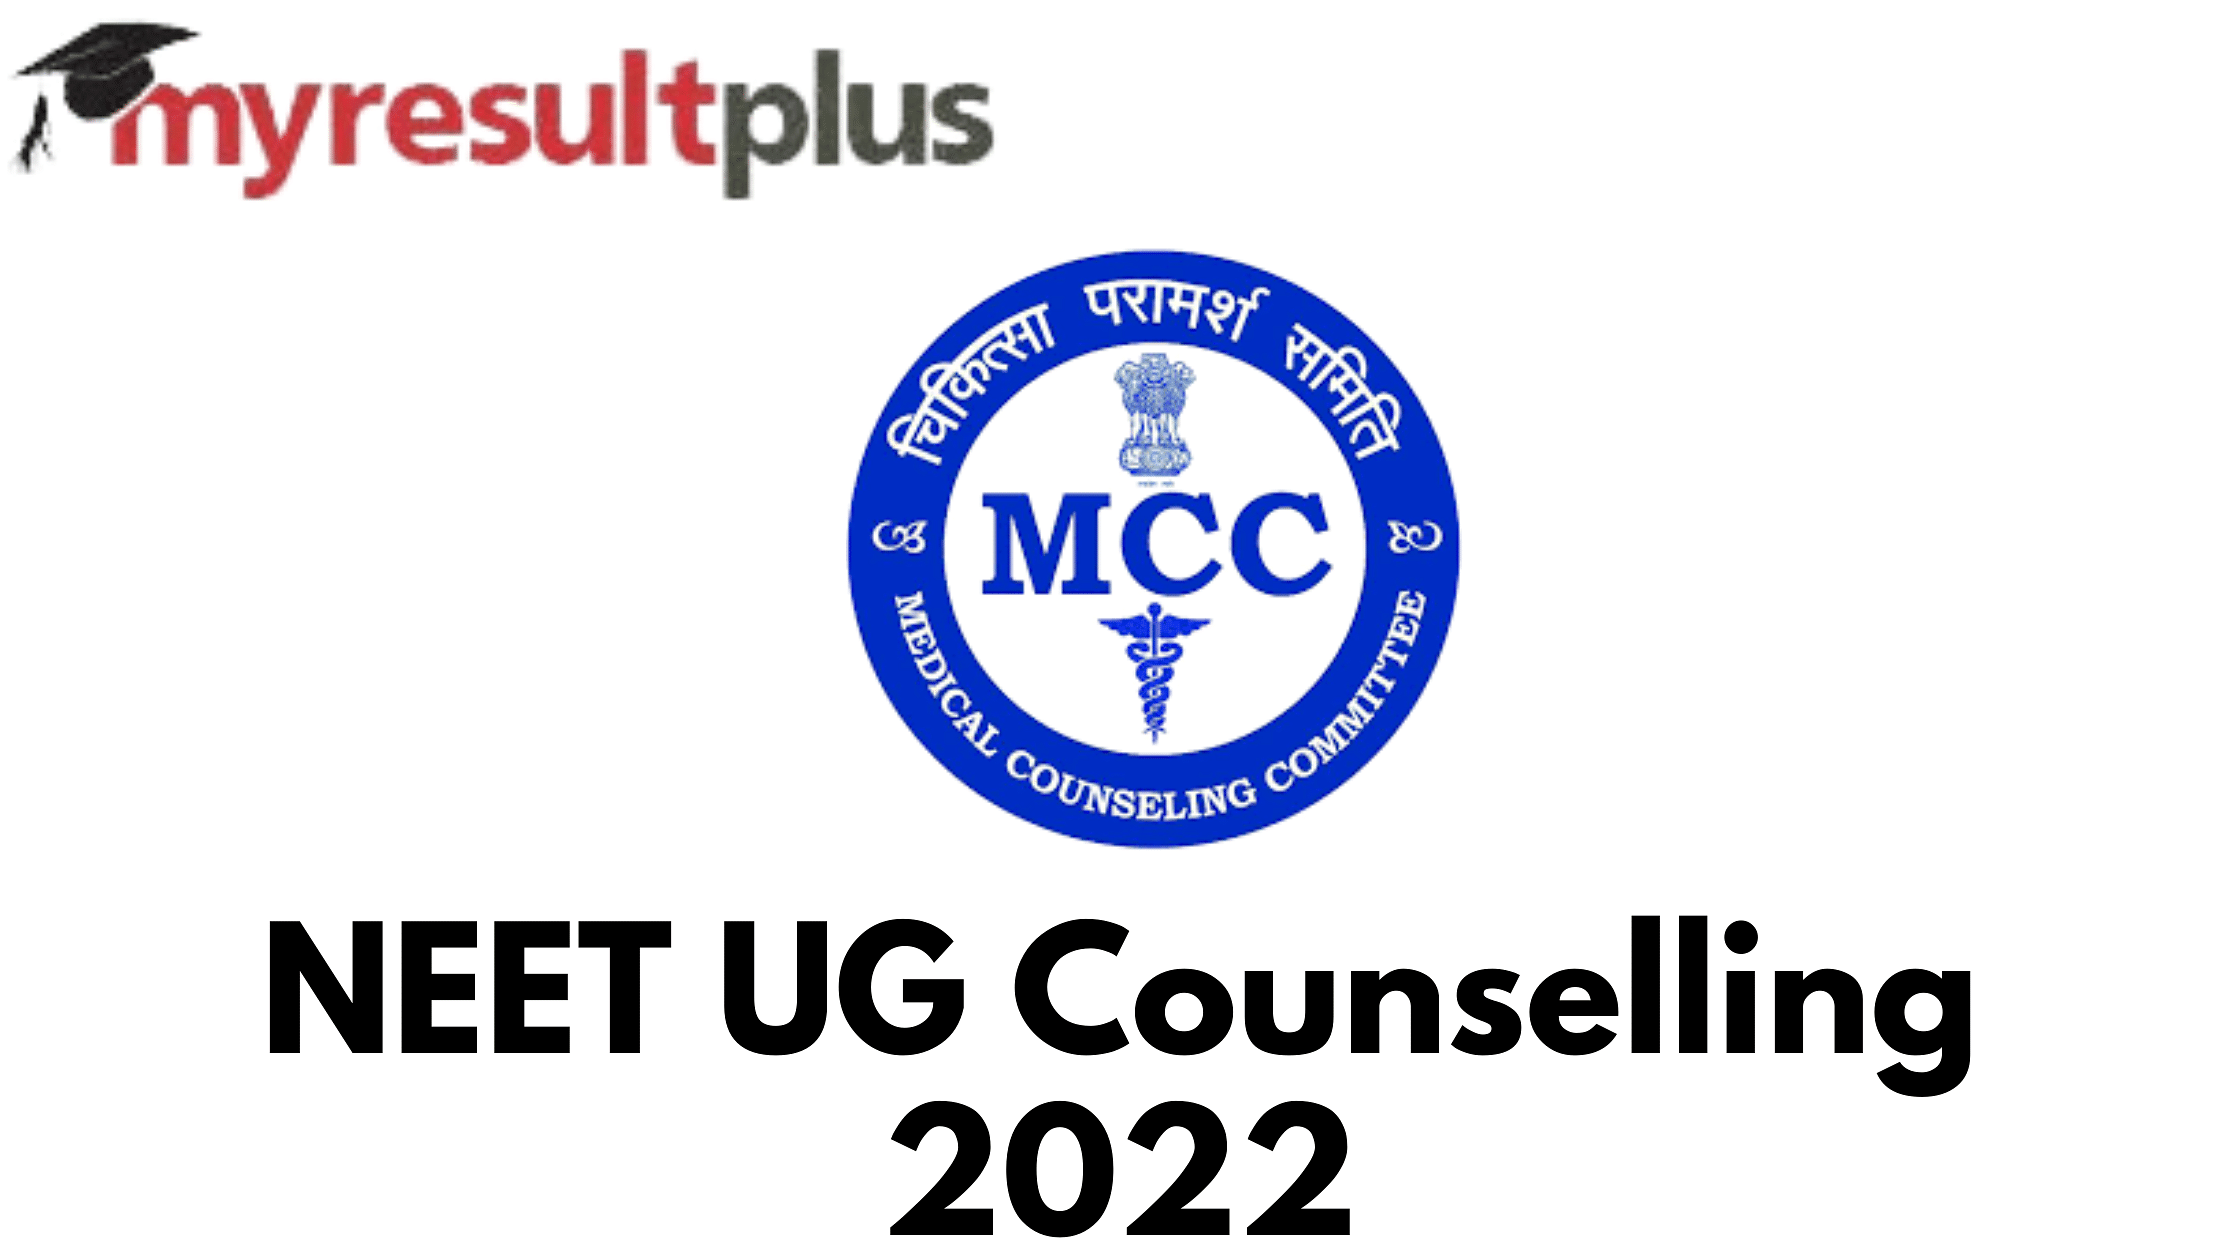 NEET UG Counselling 2022: Registrations Begin Today, Know Steps to Apply Here